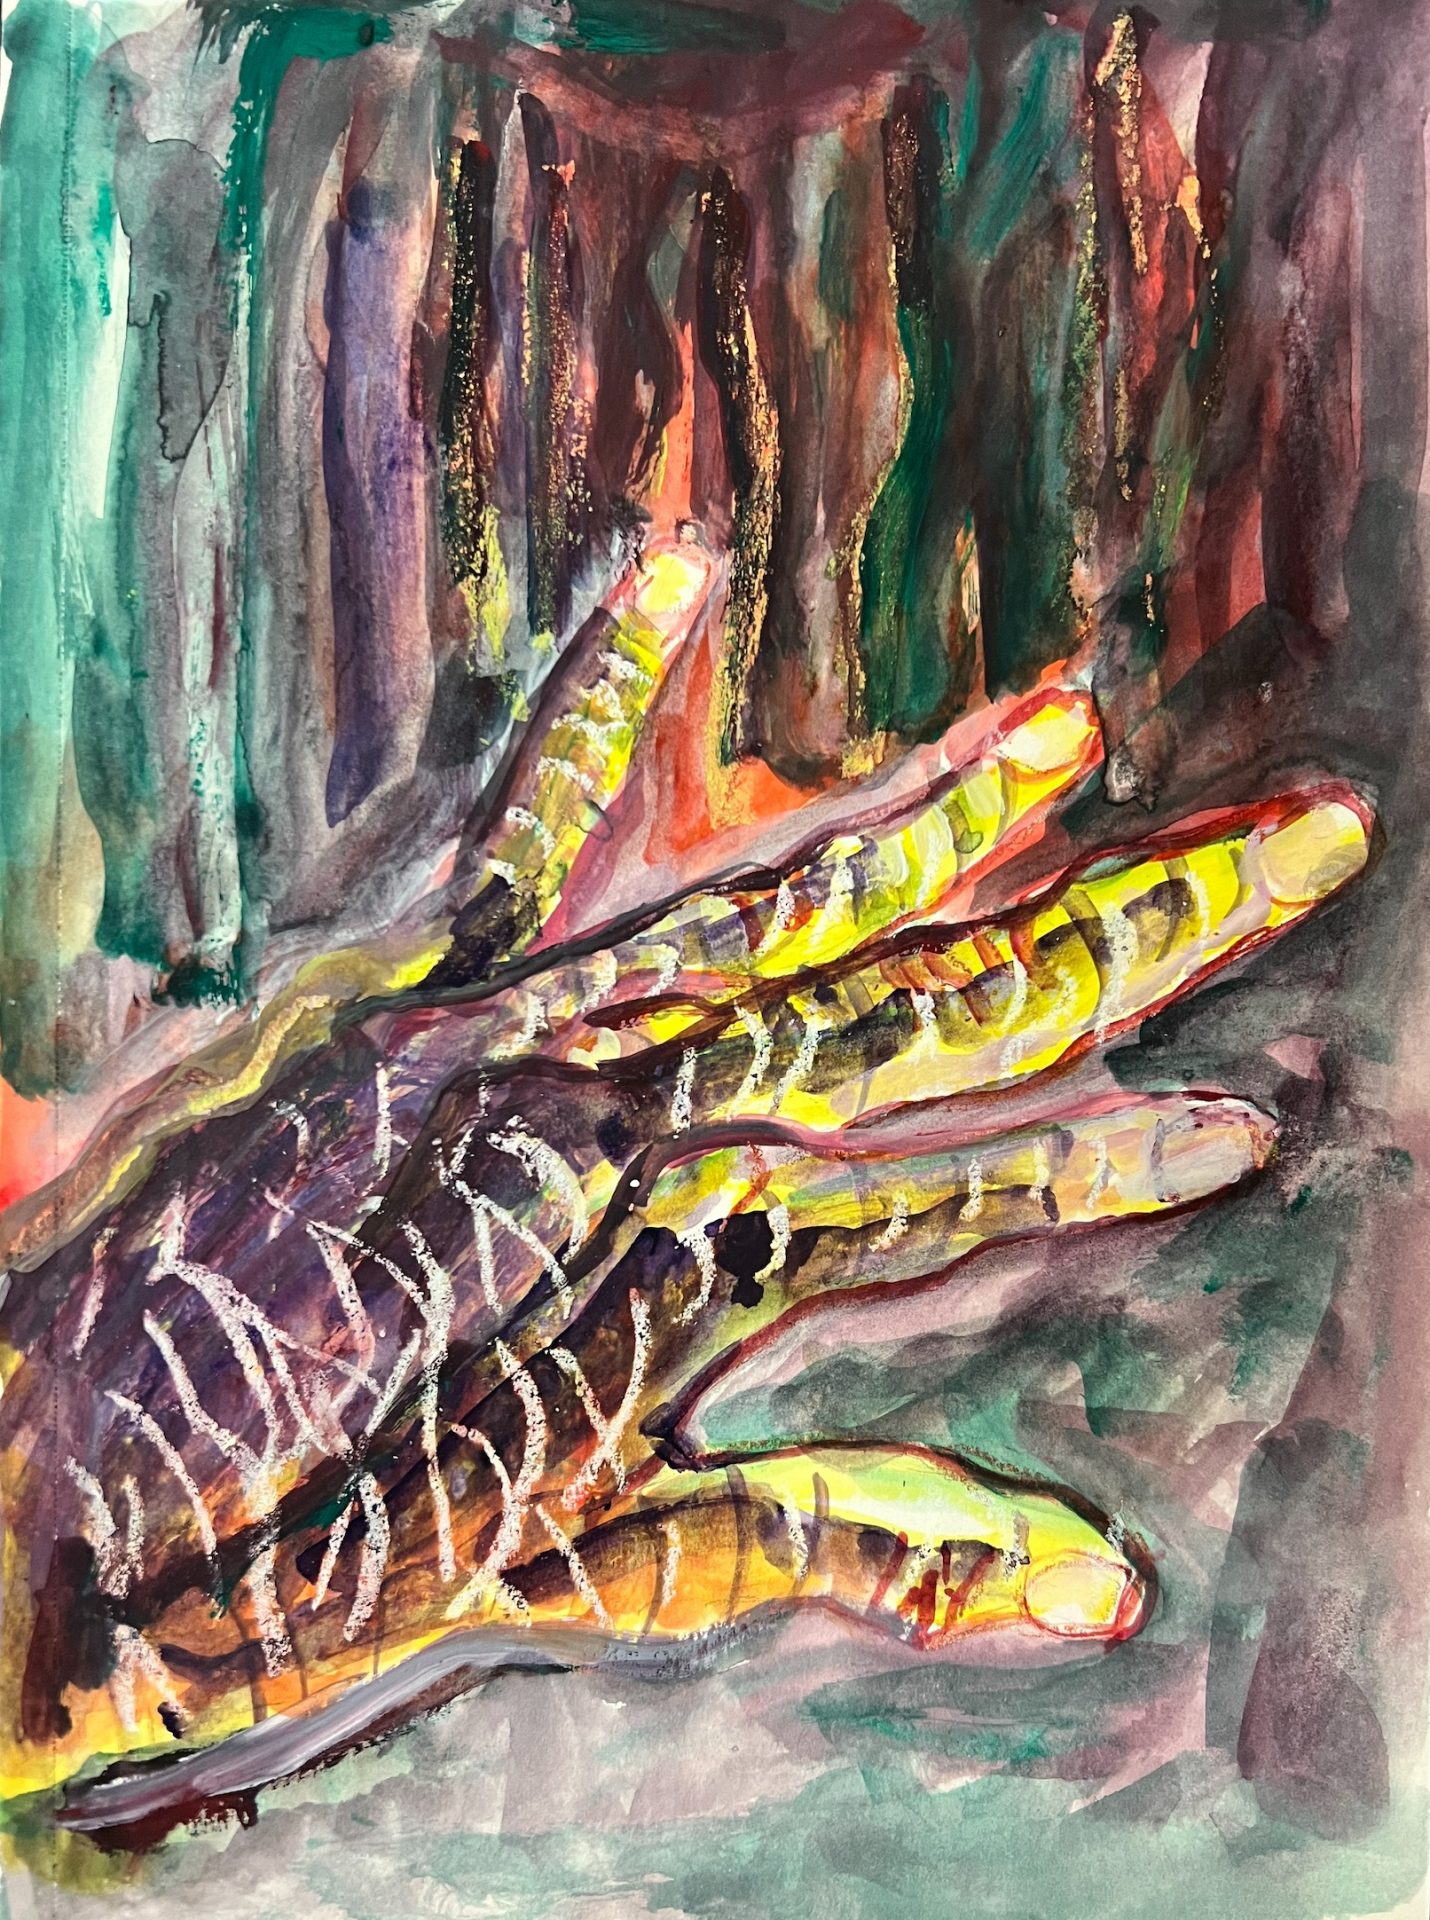 A semi-abstract painting depicting a hand with a backgrounds of greens, reds, and purples.